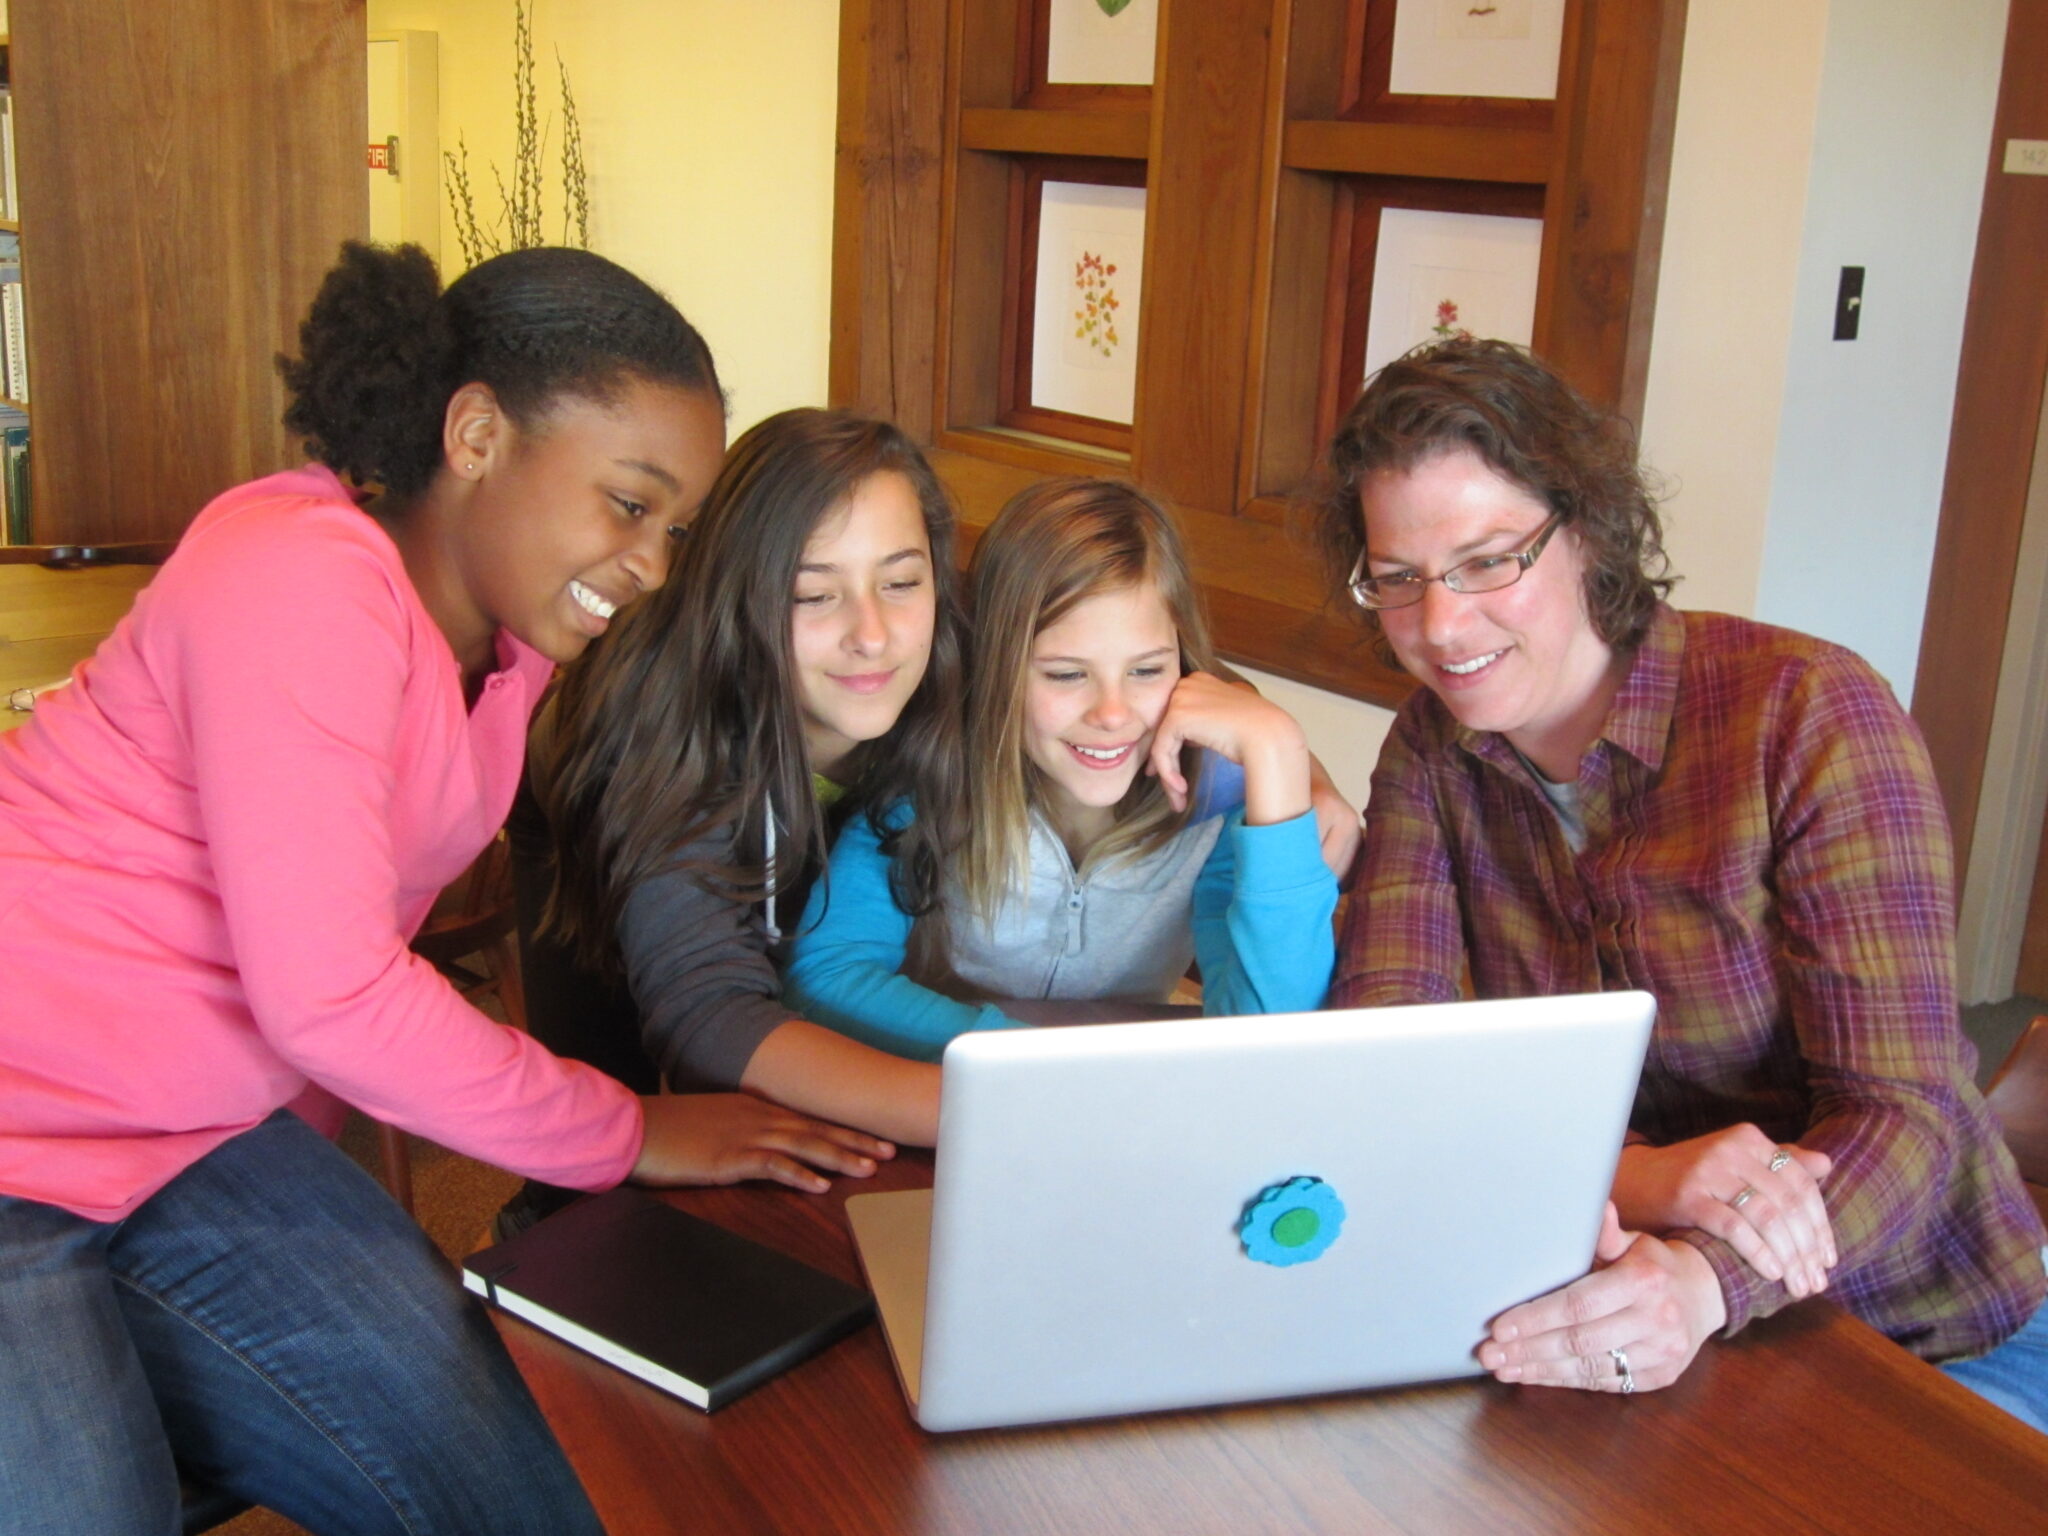 SciGirls Offers Real STEM Role Models for Young Girls